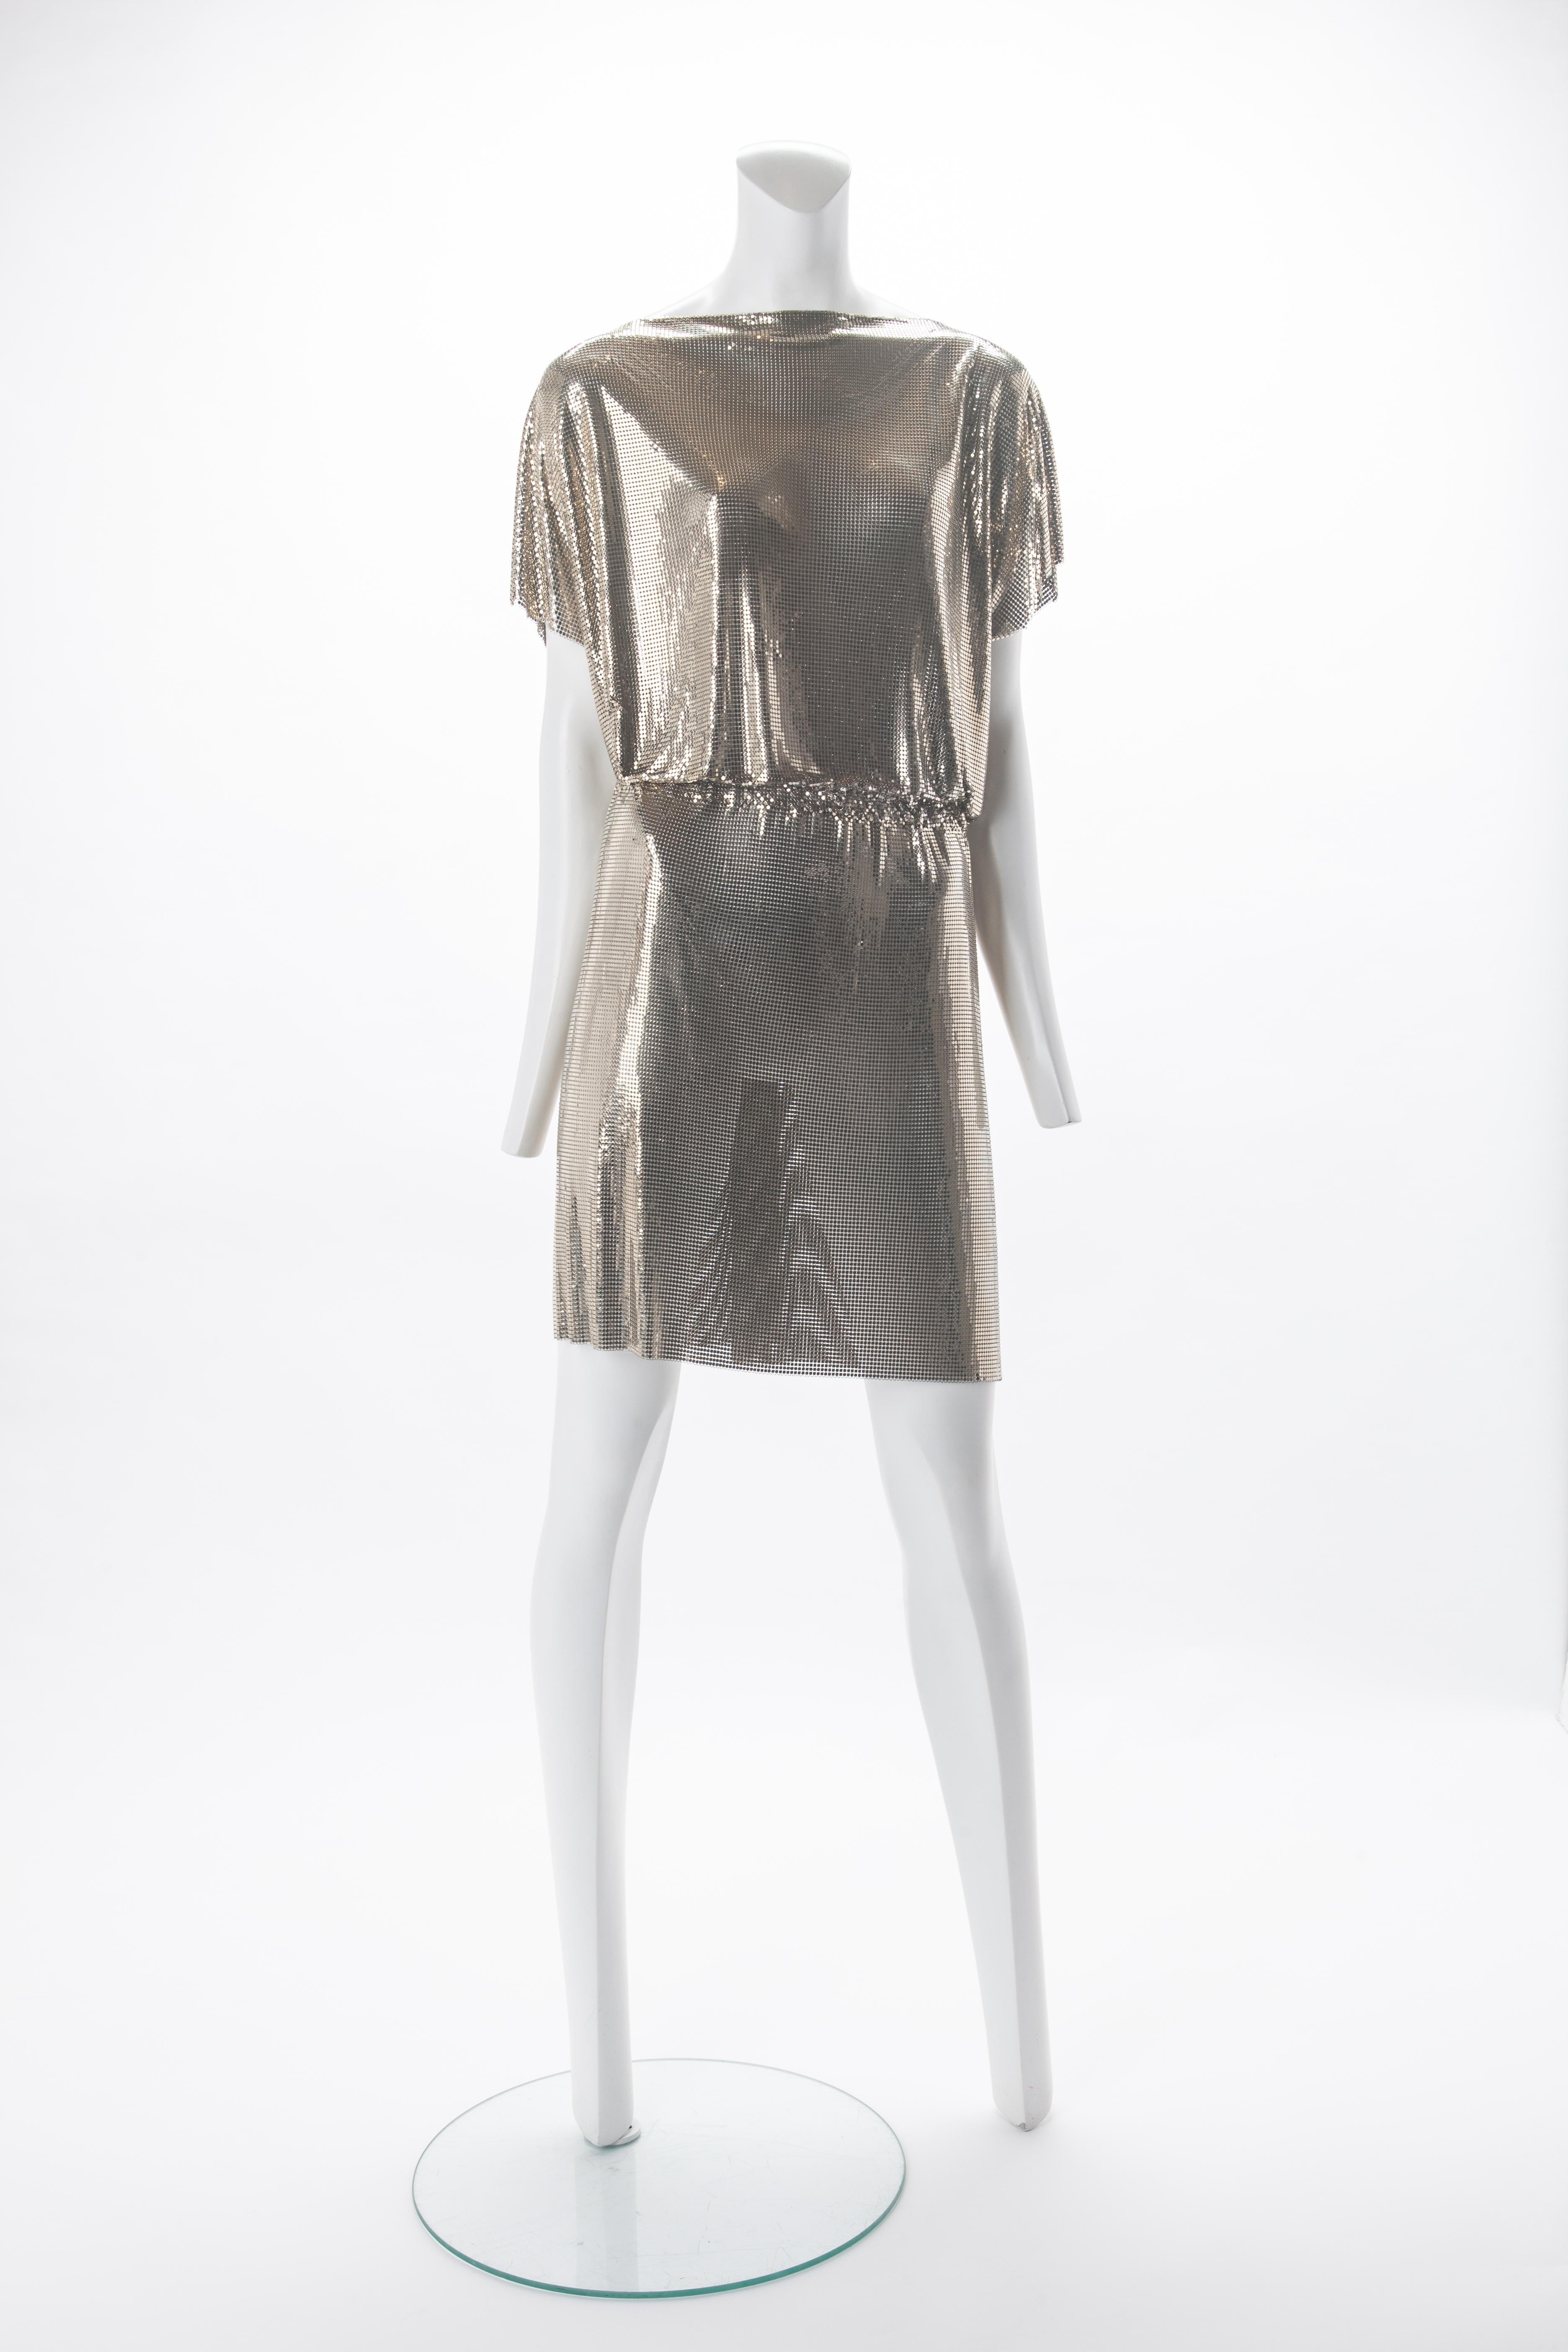 Gianni Versace Gold Oroton Dress, F/W 1994.
Boatneck gold chainmail dress with draped sleeves. Features elastic band at waist that can be adjusted from inside. 
Fits US size 4 to 8. 